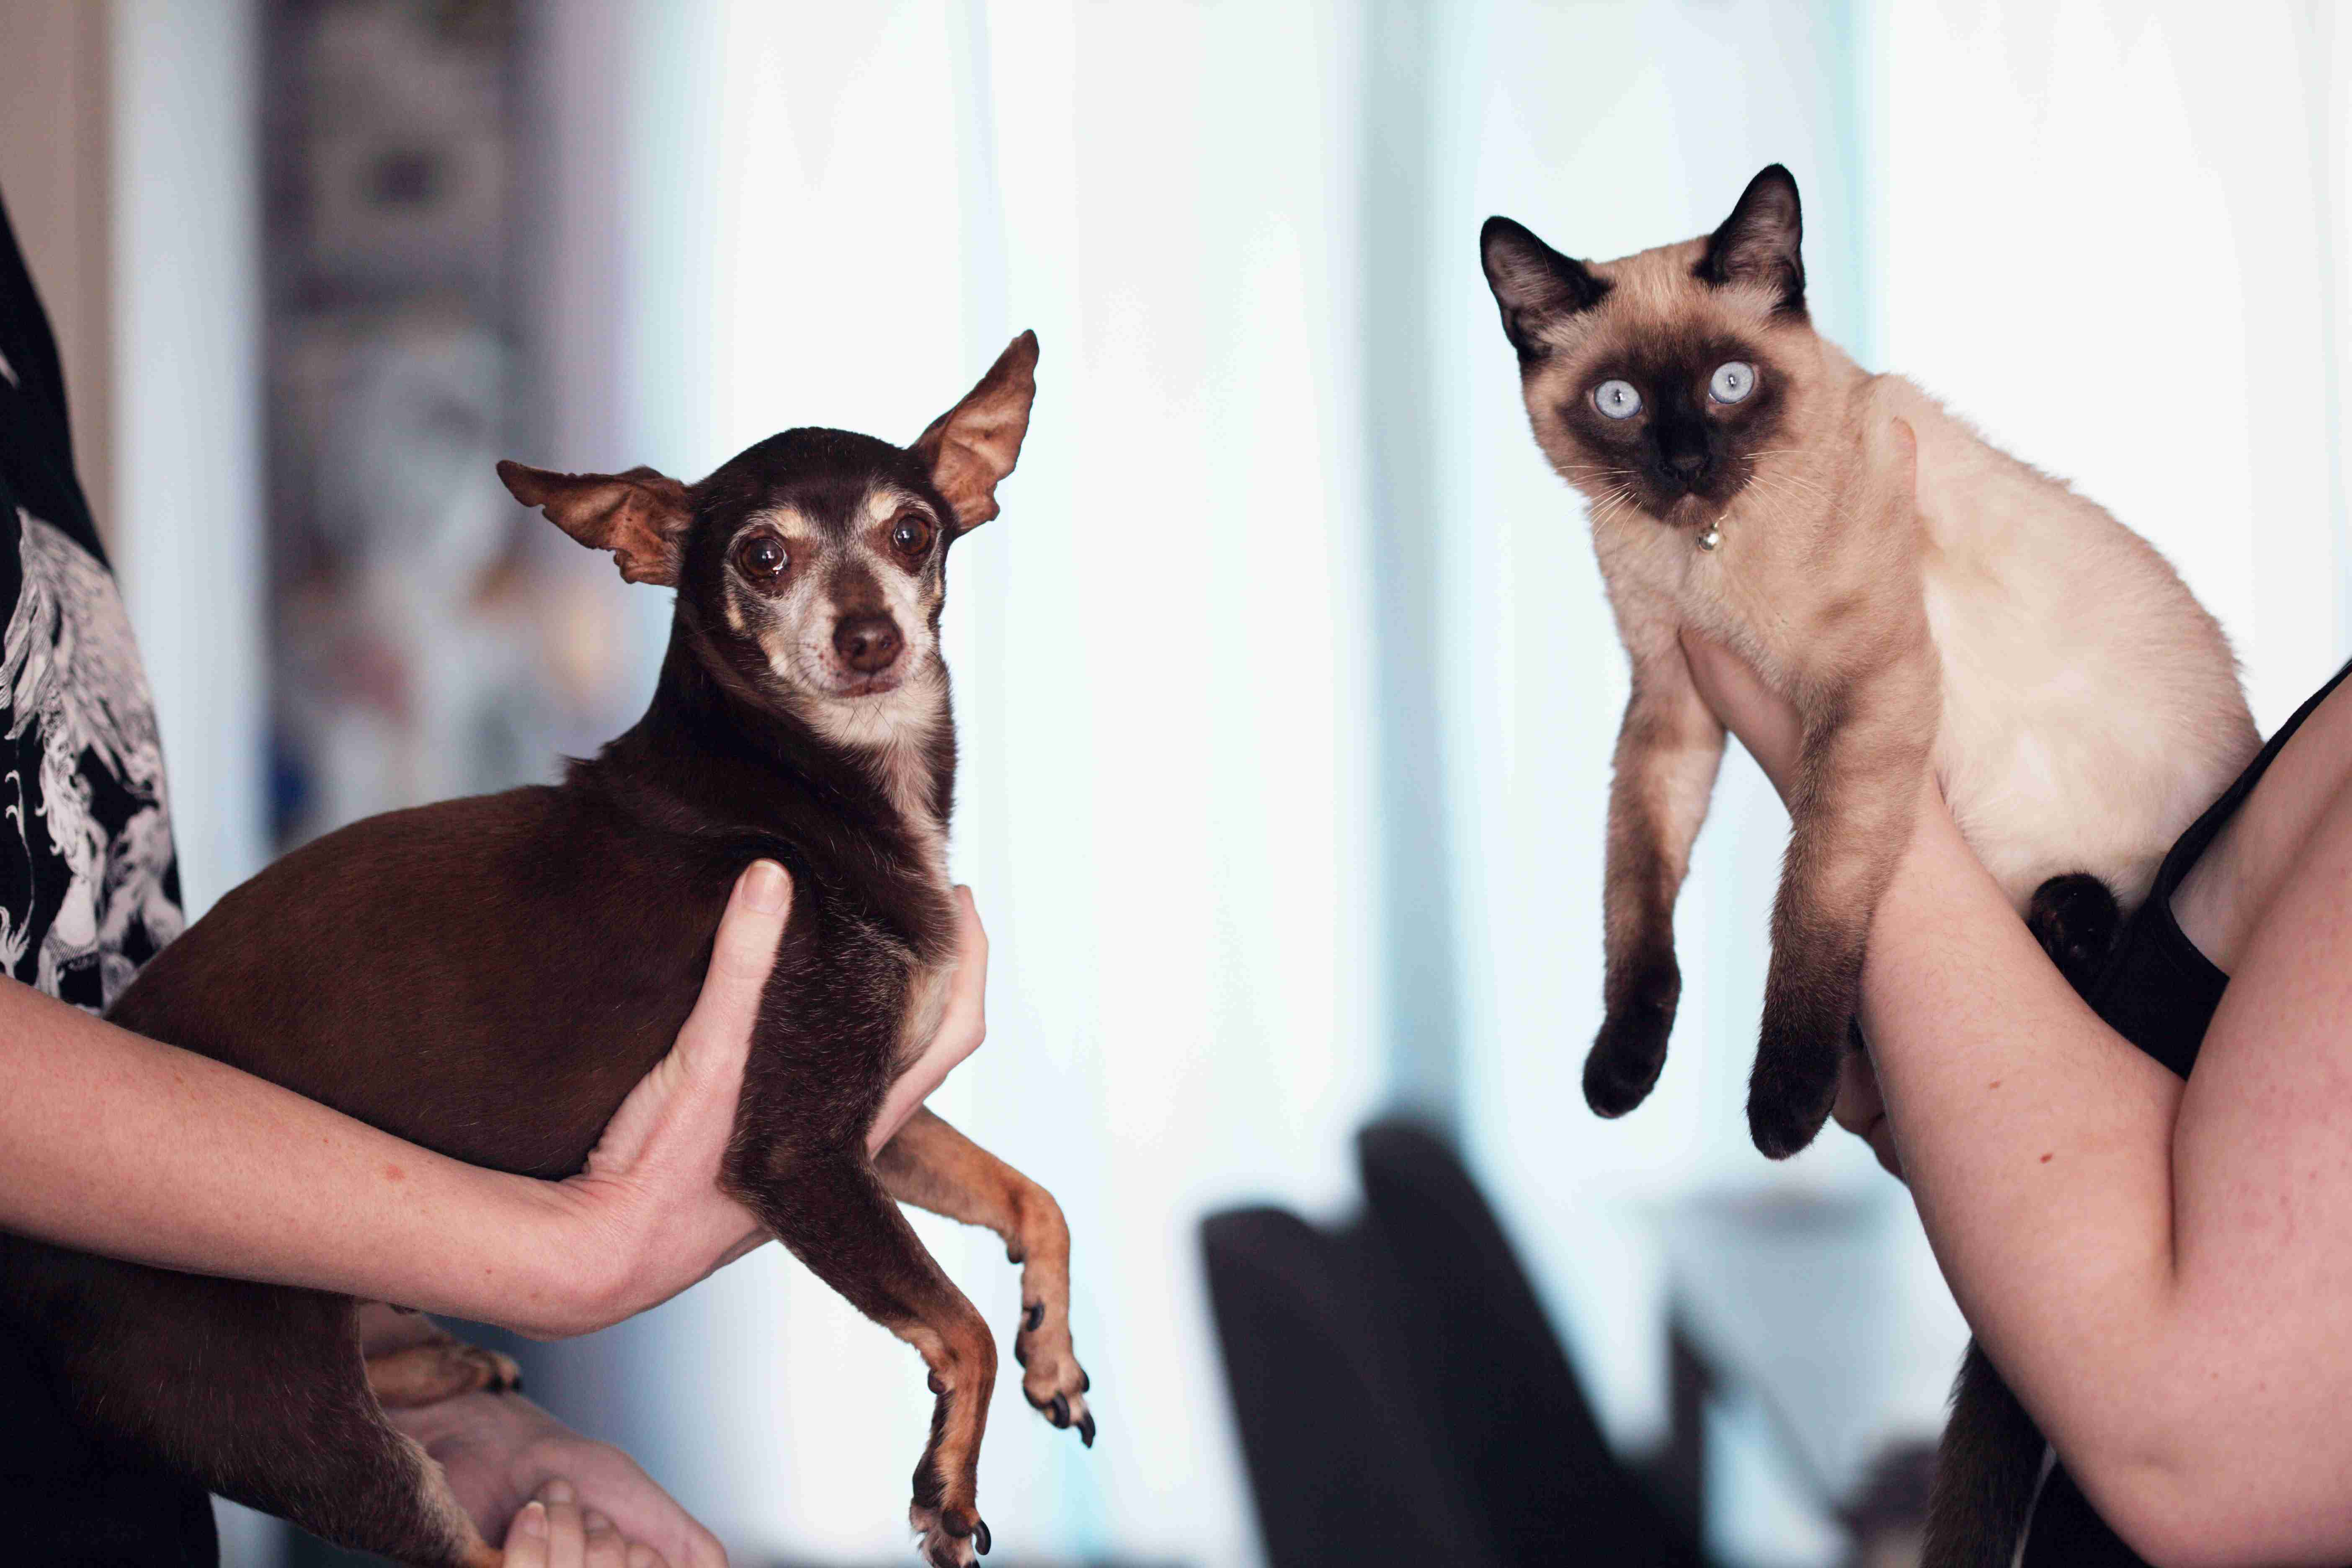 Can anger issues in Chihuahuas be triggered by a change in environment or routine?